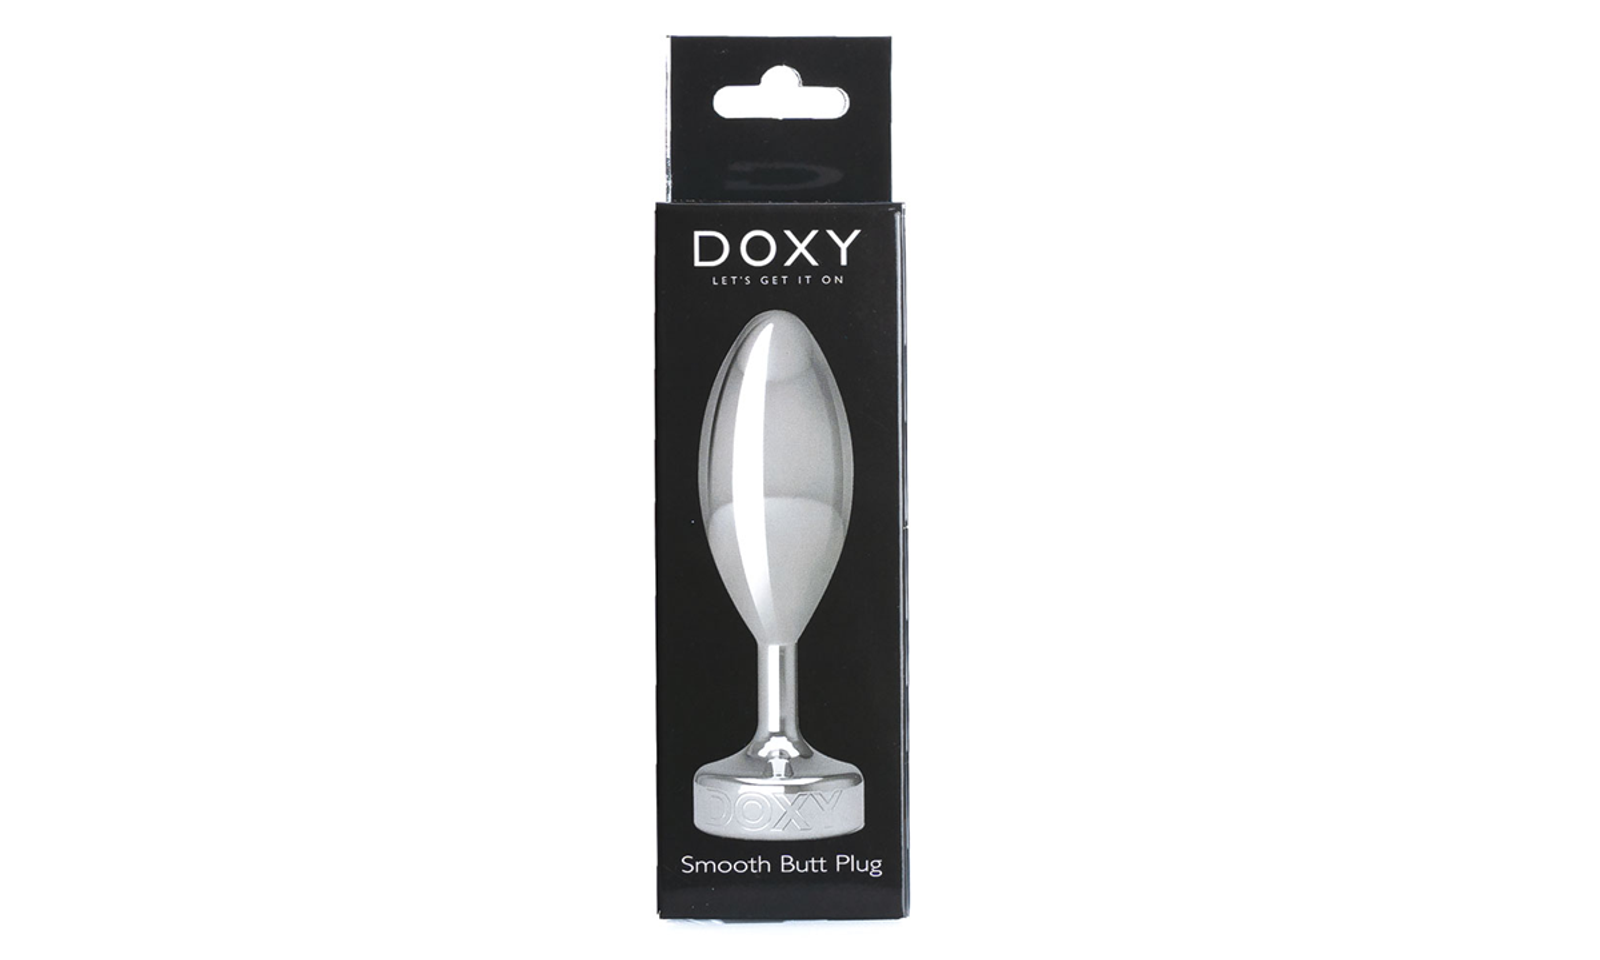 Entrenue Now Shipping New Doxy Die Cast 3R, Aluminum Butt Plugs